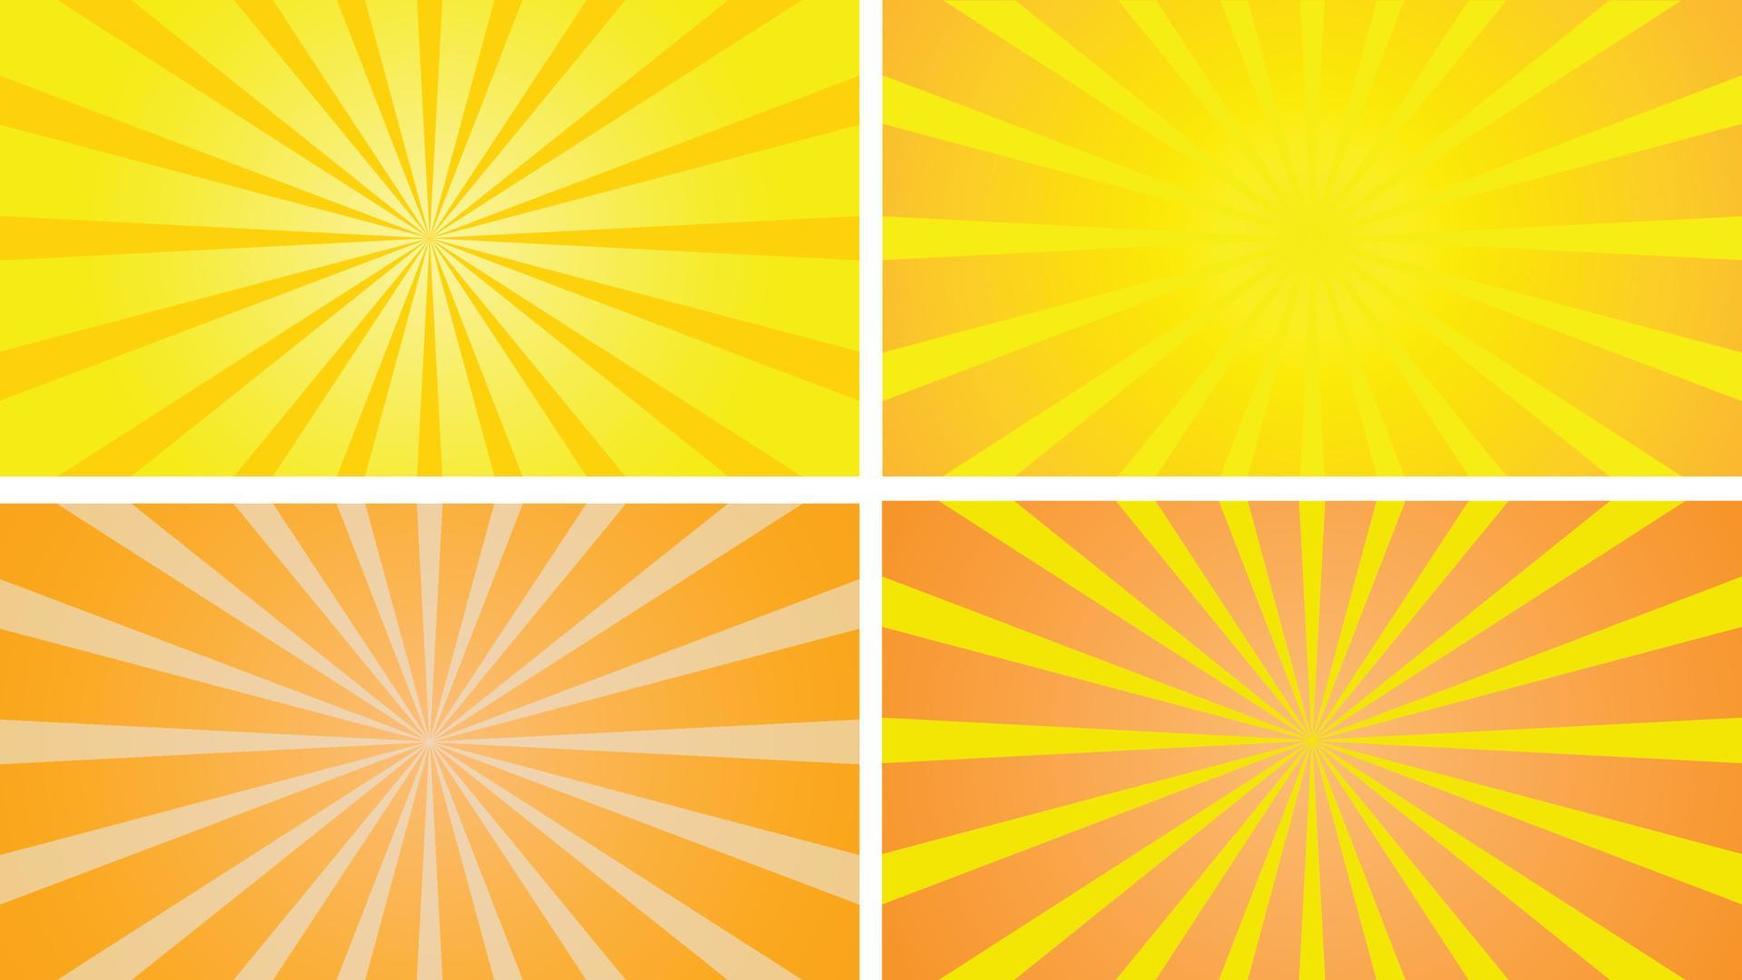 Simple yellow color sunburst pack with gradient vector background illustration.